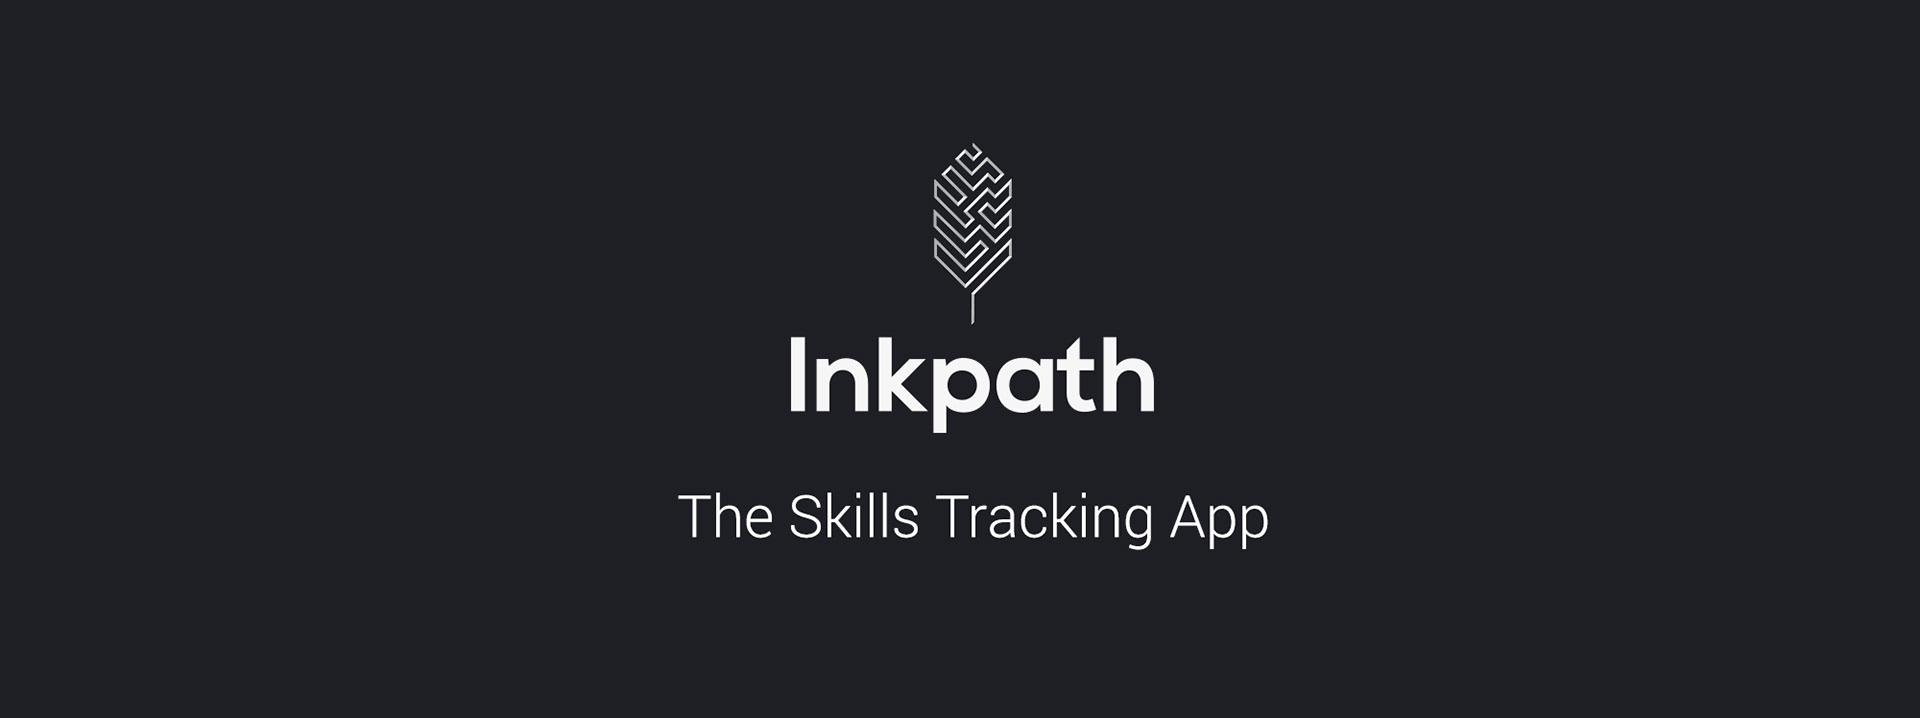 Inkpath project 1